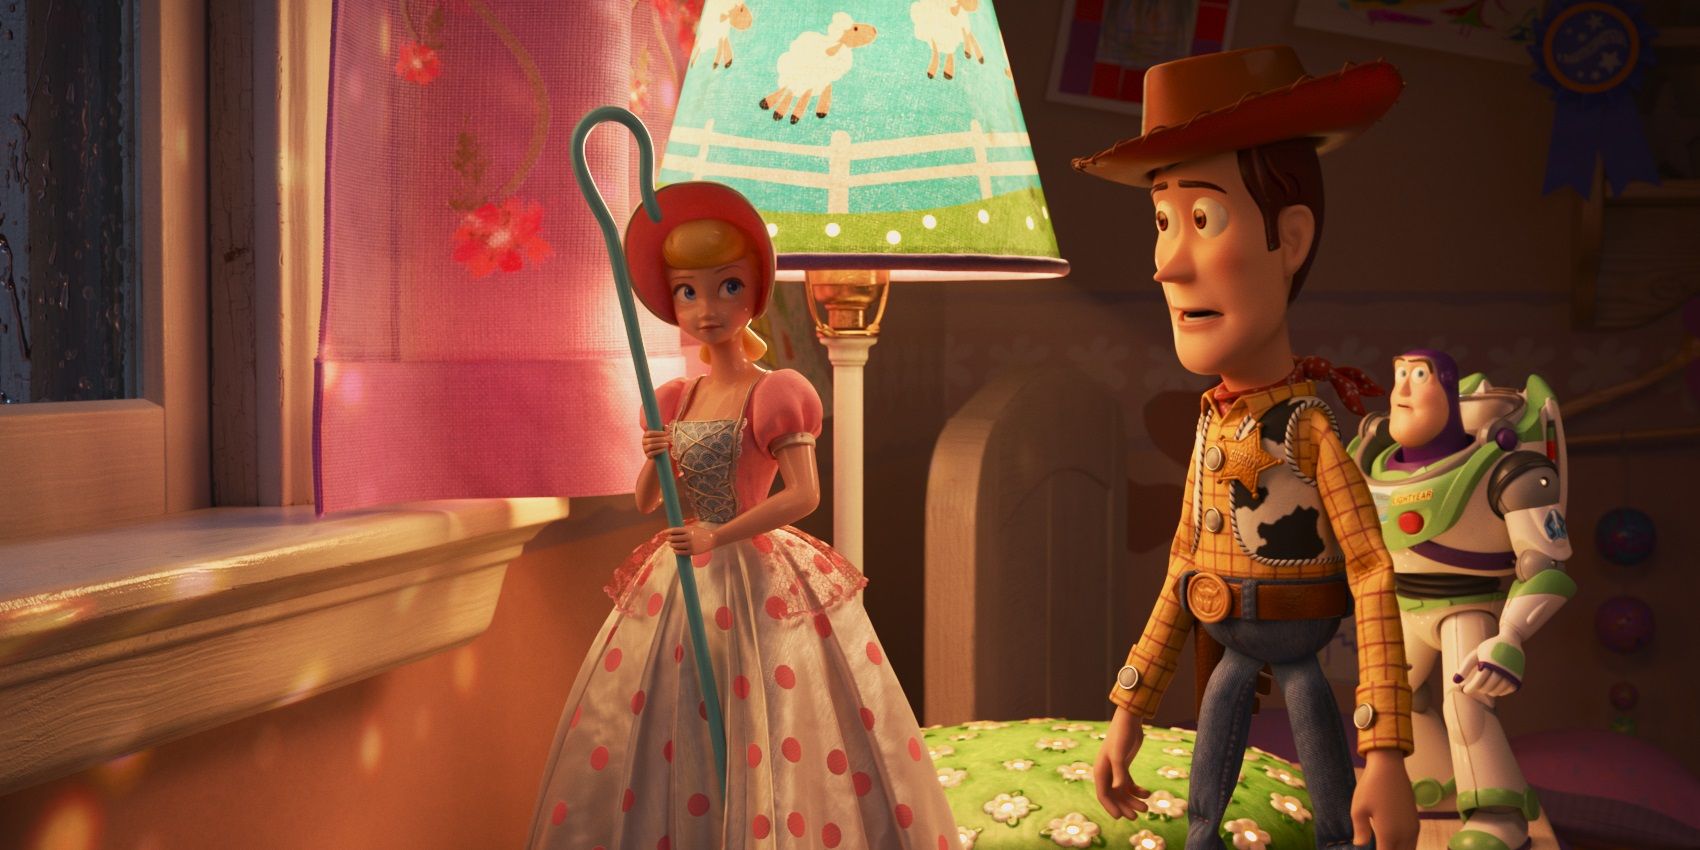 Bo tries to help Woody and Buzz save a lost toy in Toy Story 4.